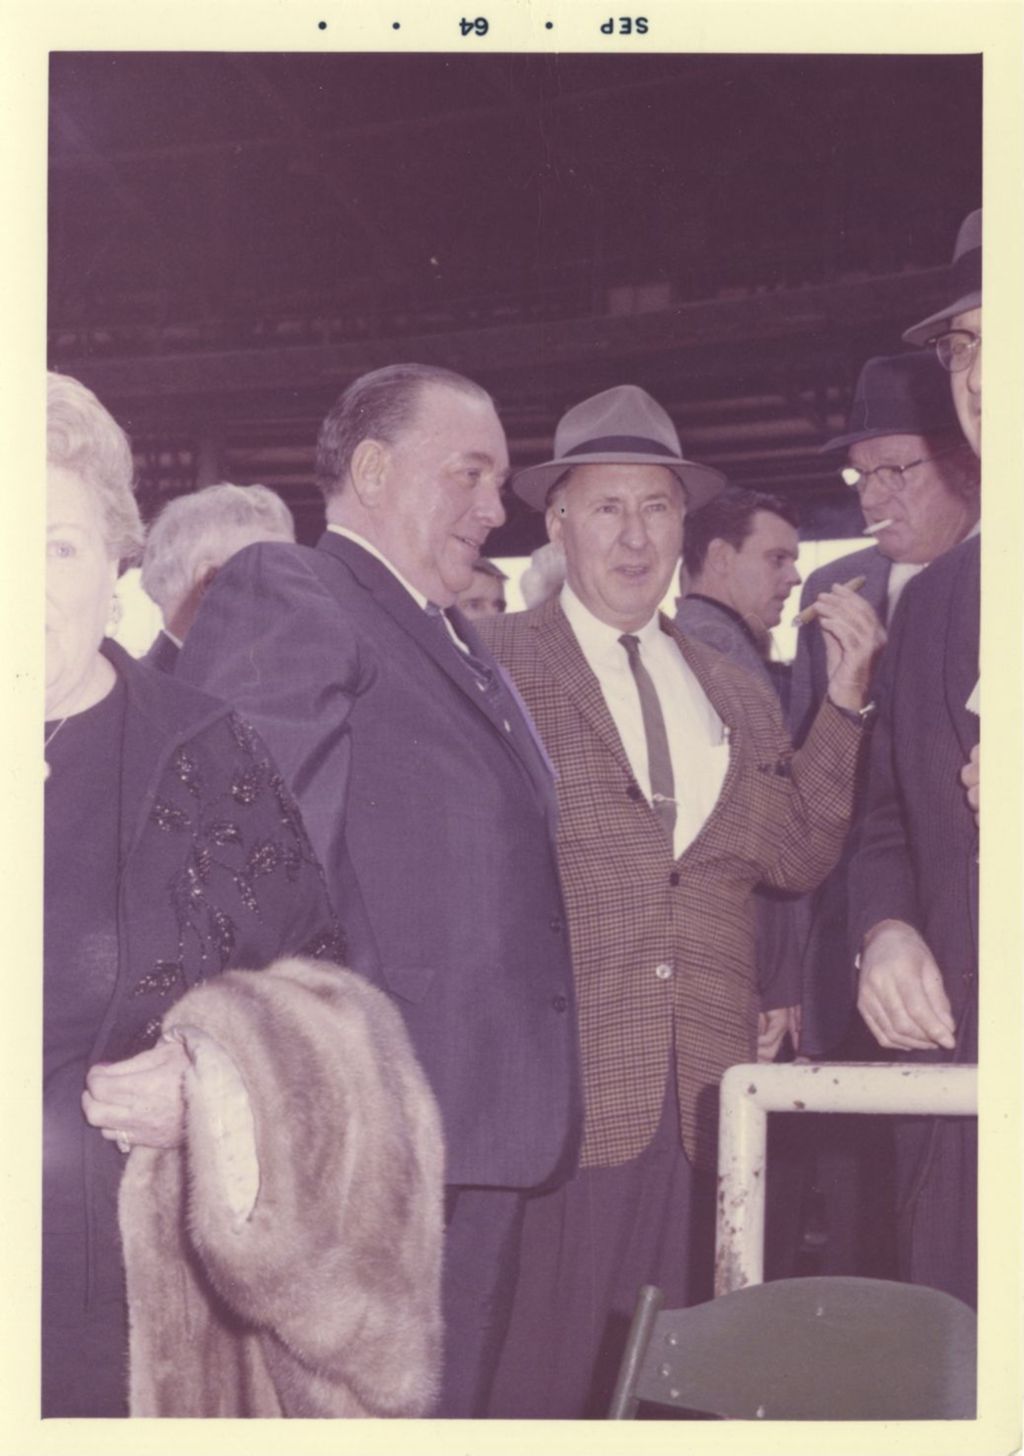 Miniature of Richard J. Daley and others at a baseball game